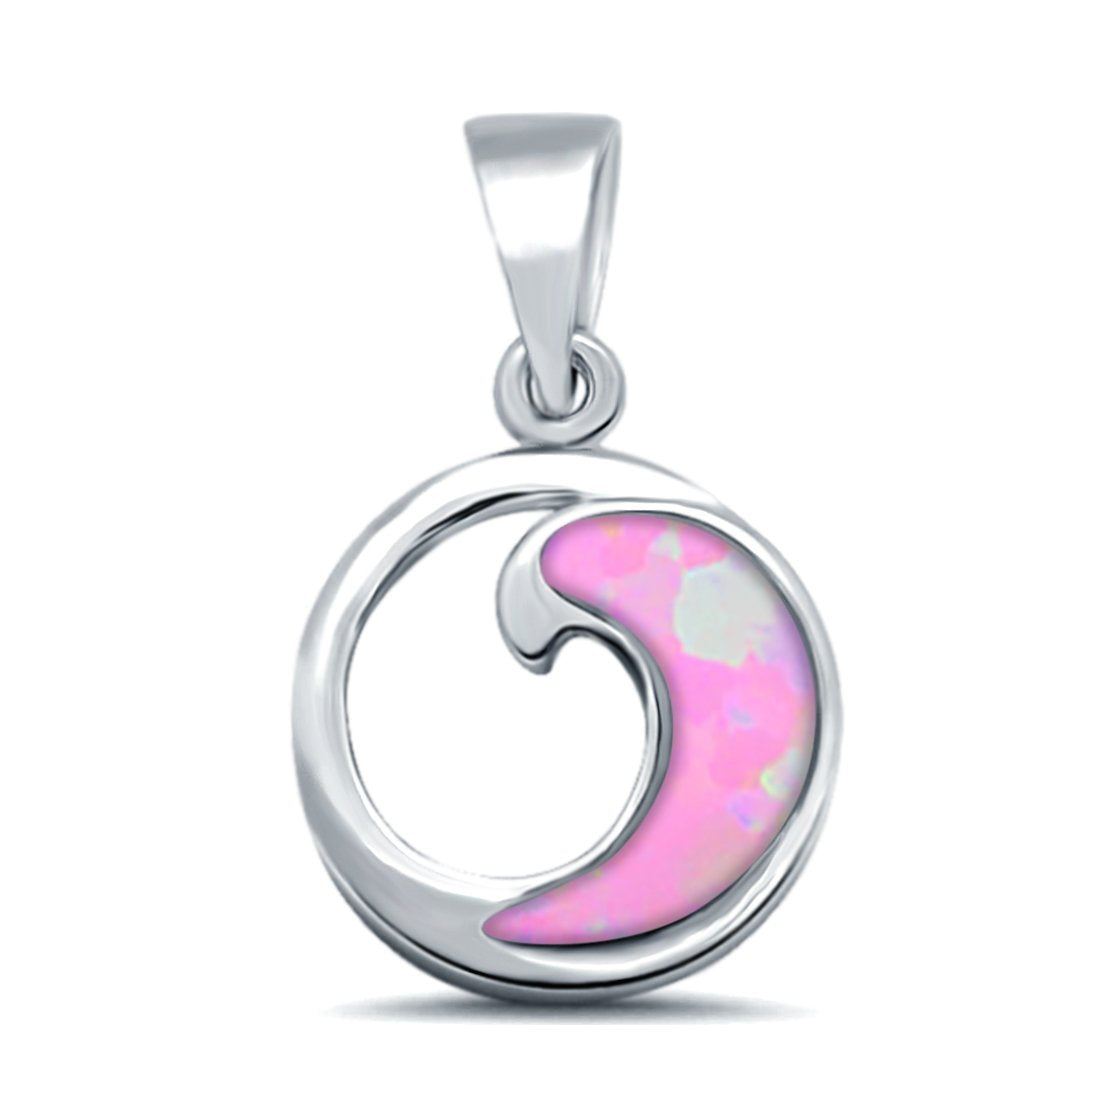 Lab Created Opal Wave Design 925 Sterling Silver Charm Pendant